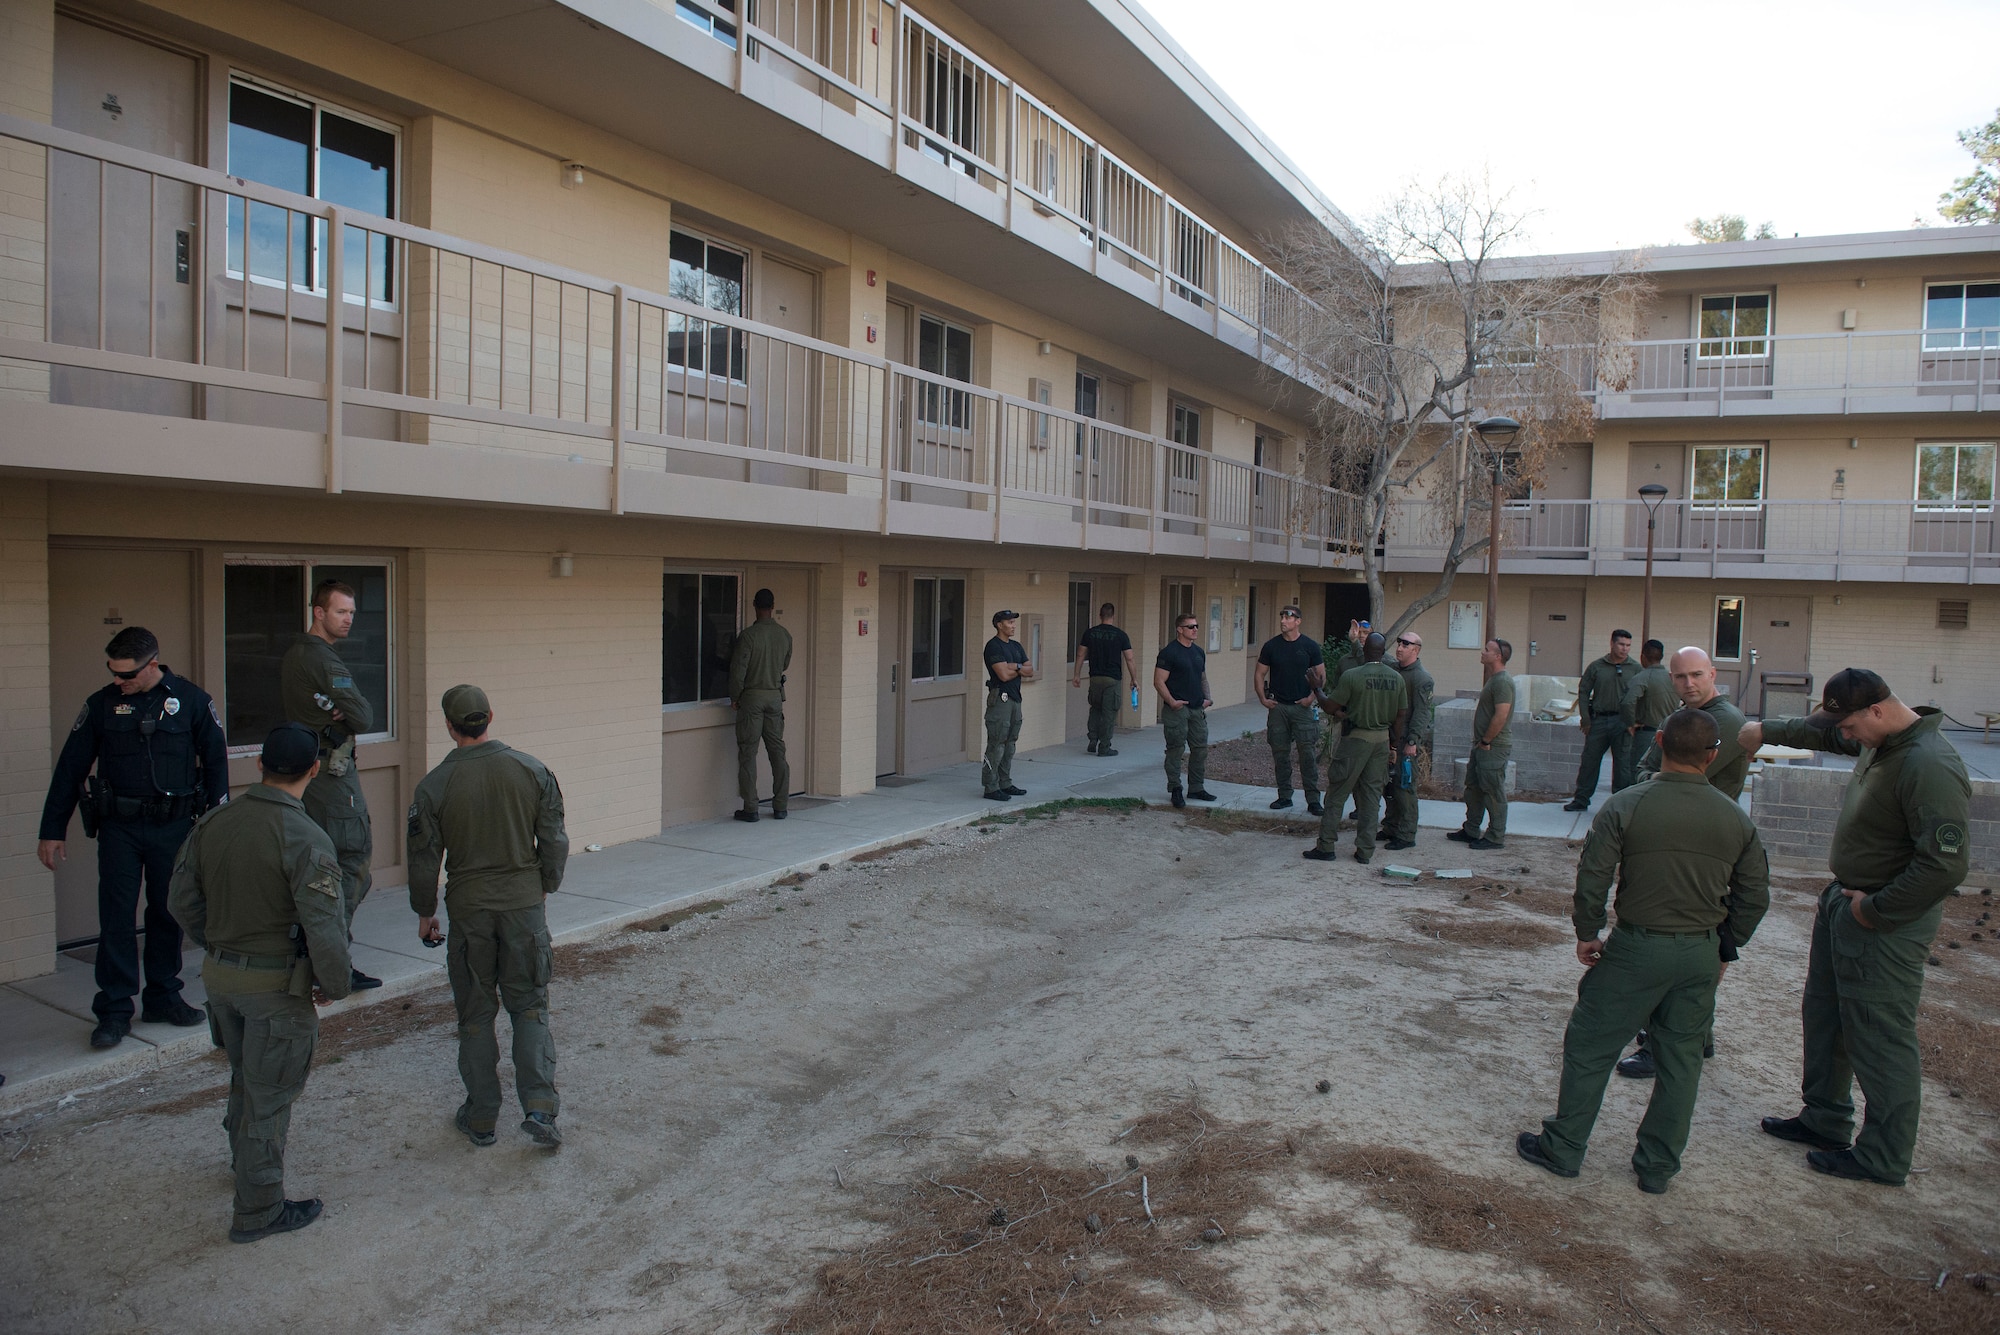 The North Las Vegas Swat team visits vacant dorms on Nellis Air Force Base, Nevada, Nov. 2, 2018. NLVS is looking to use the dorms as a place to train due to the lack of available buildings in Las Vegas. (U.S. Air Force photo by Airman 1st Class Bryan T. Guthrie)